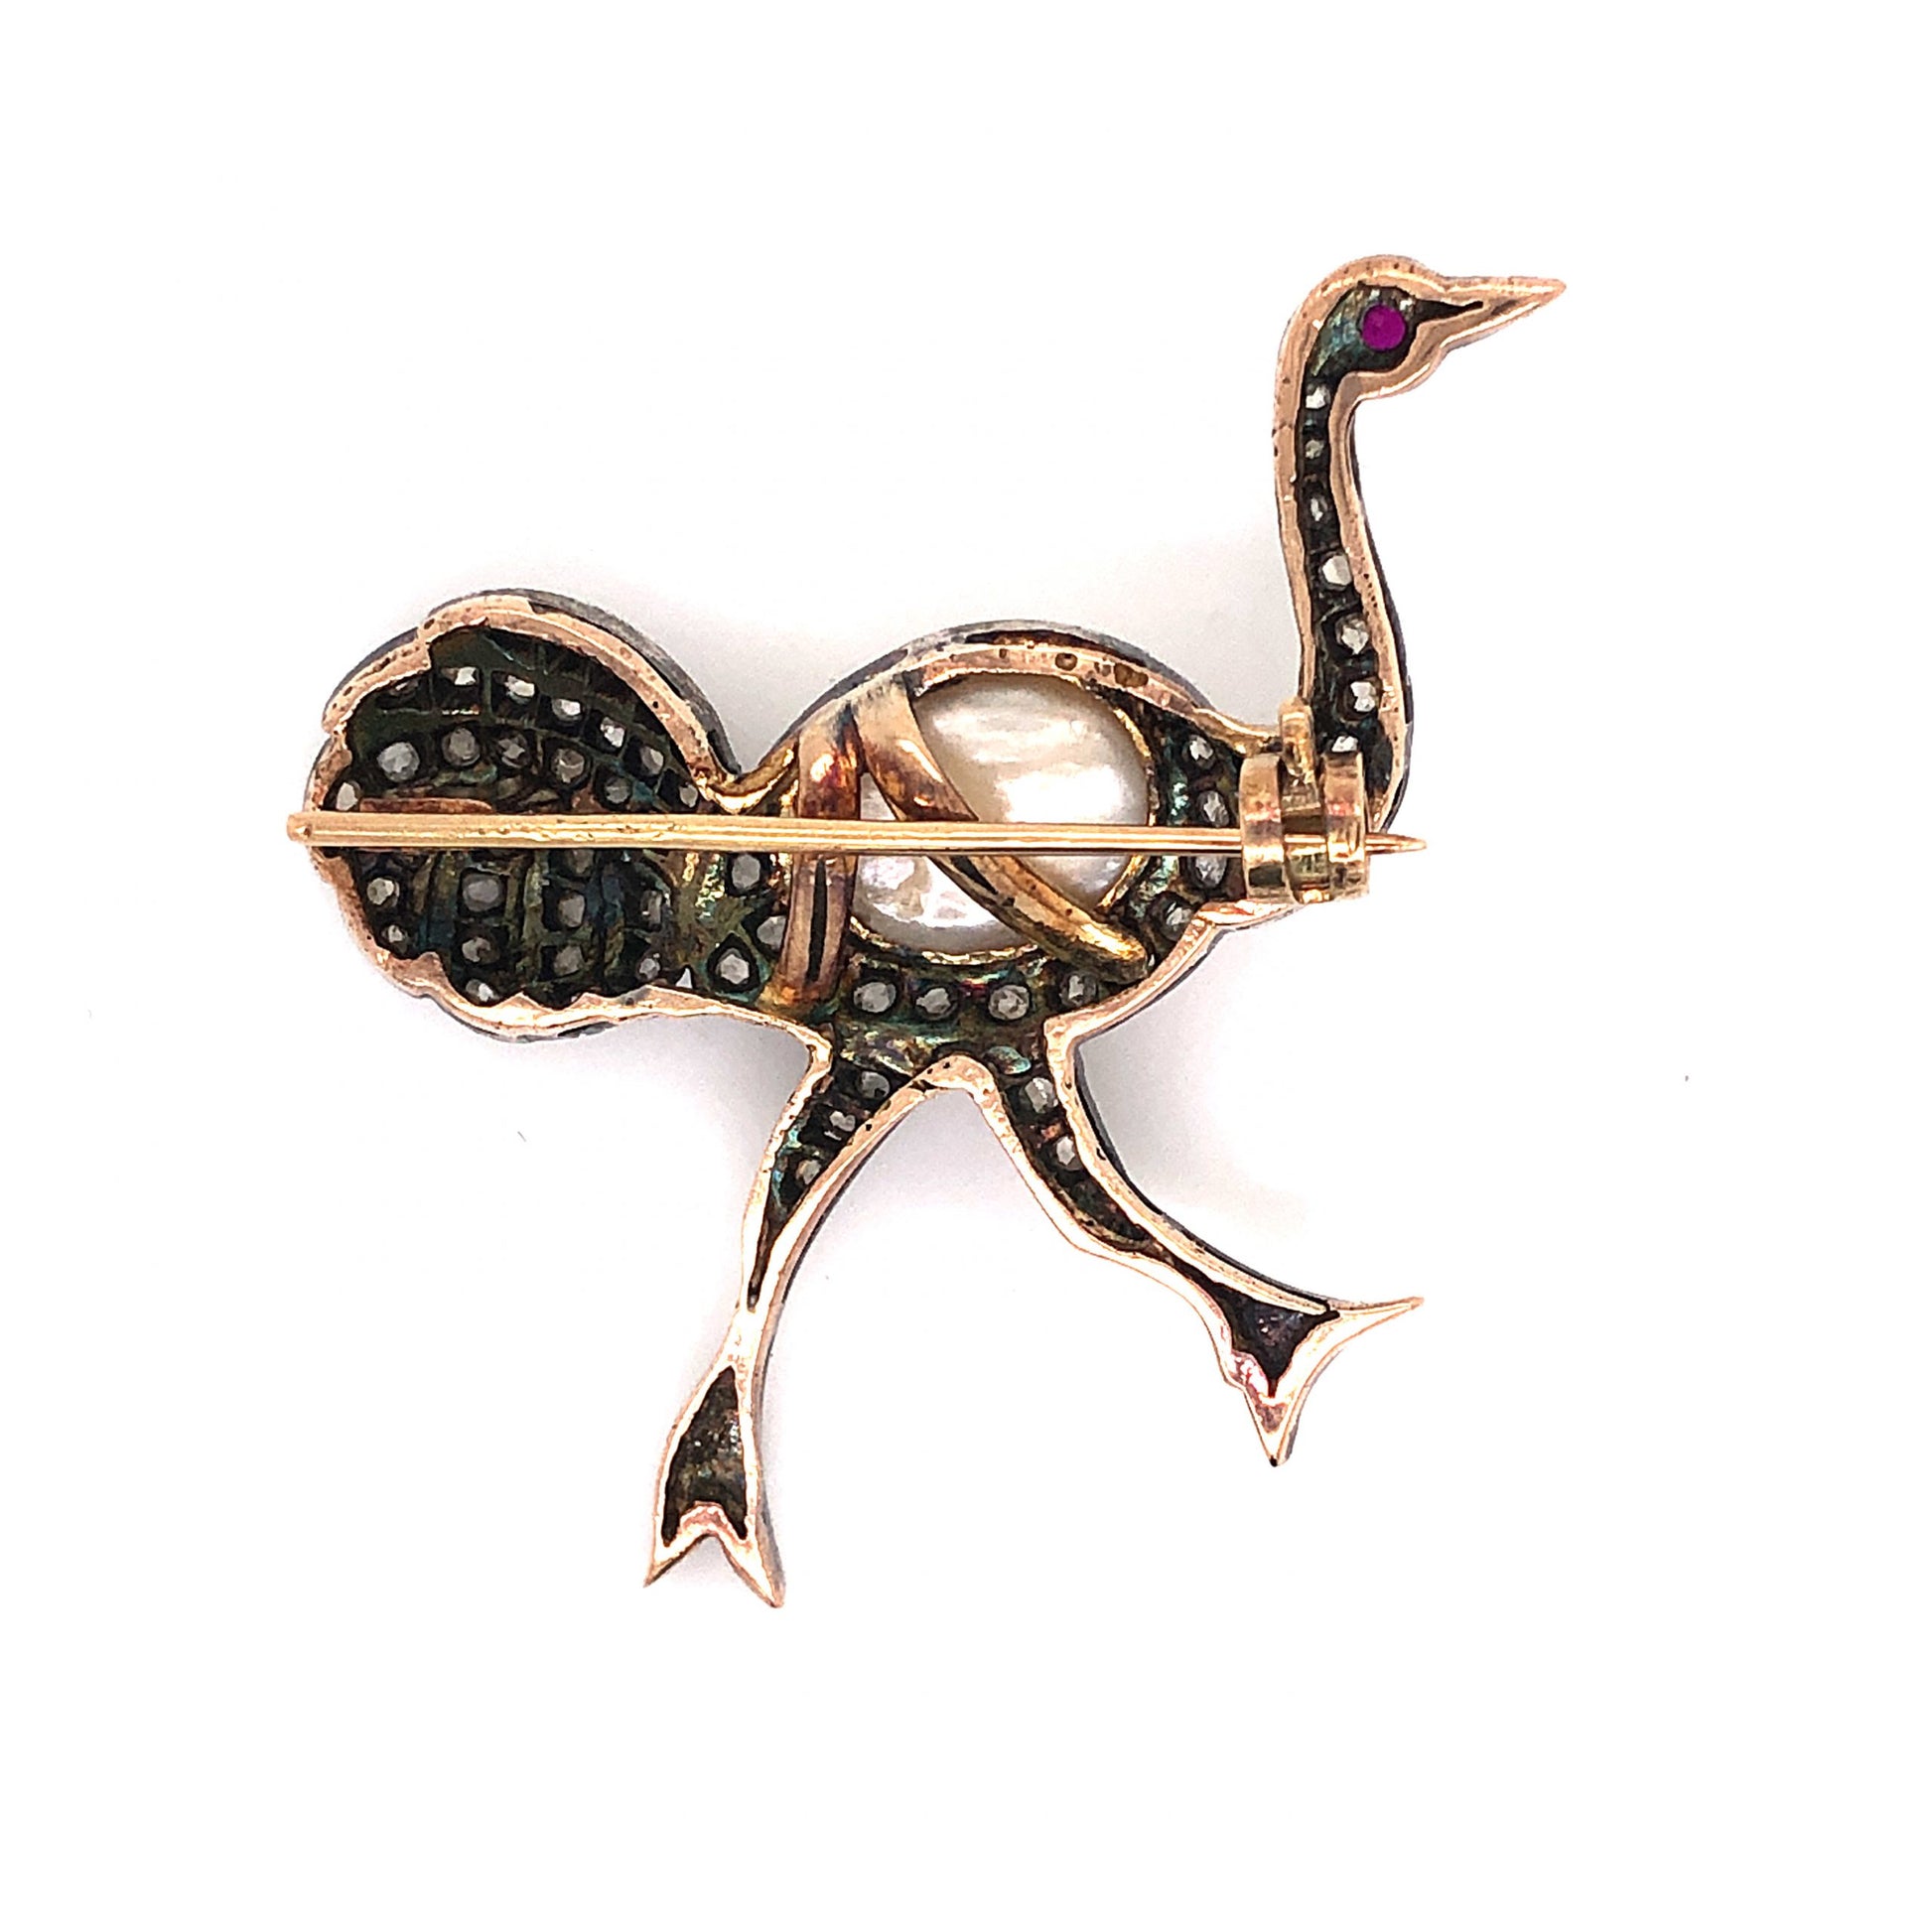 Antique Inspired Ostrich Brooch in Sterling Silver and 14k GoldComposition: 14 Karat Yellow Gold/Sterling Silver Total Diamond Weight: 1.24ct Total Gram Weight: 10.4 g